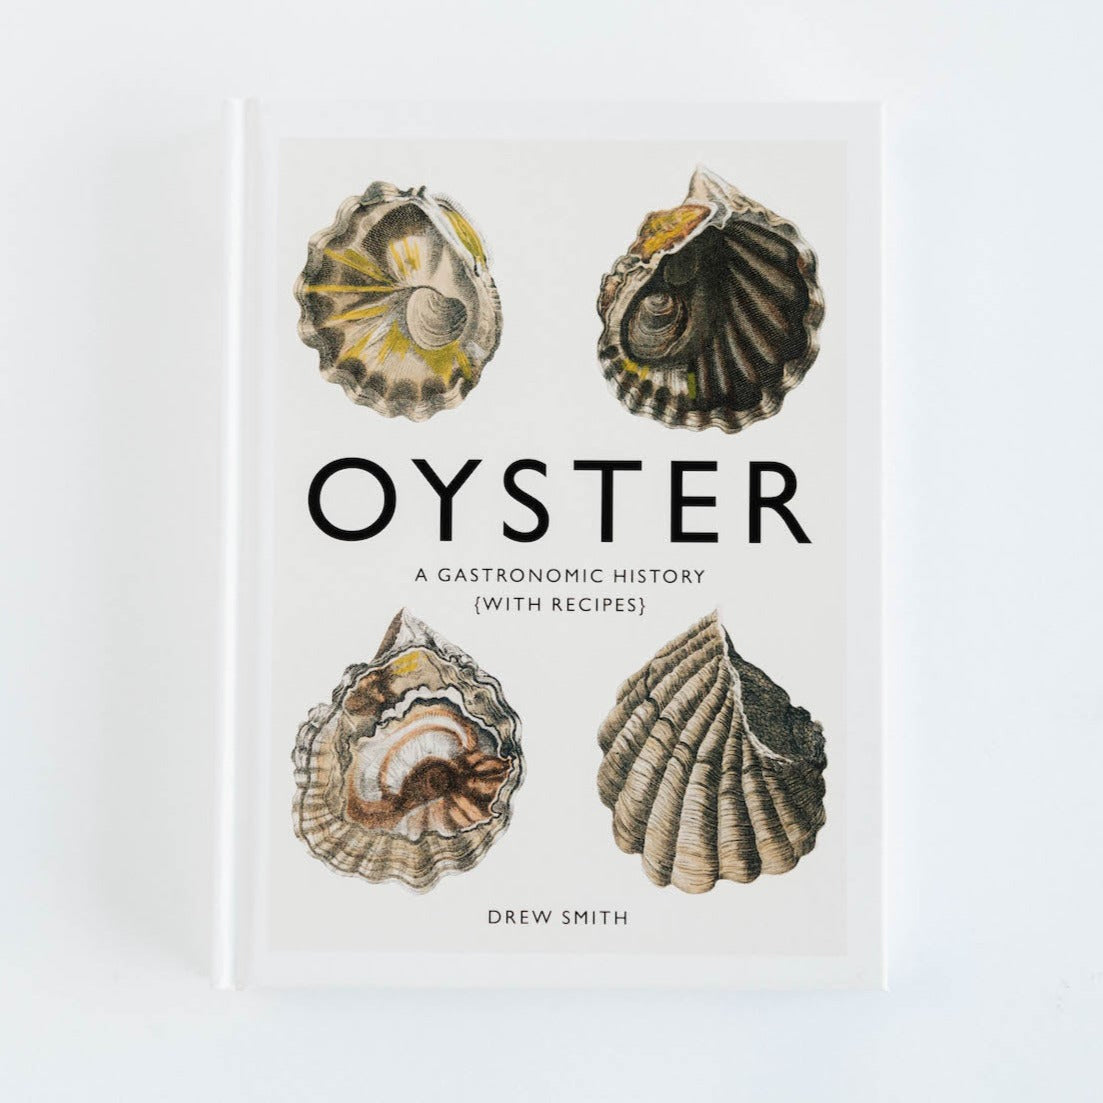 Front cover featuring illustrations of oyster shells with black text.